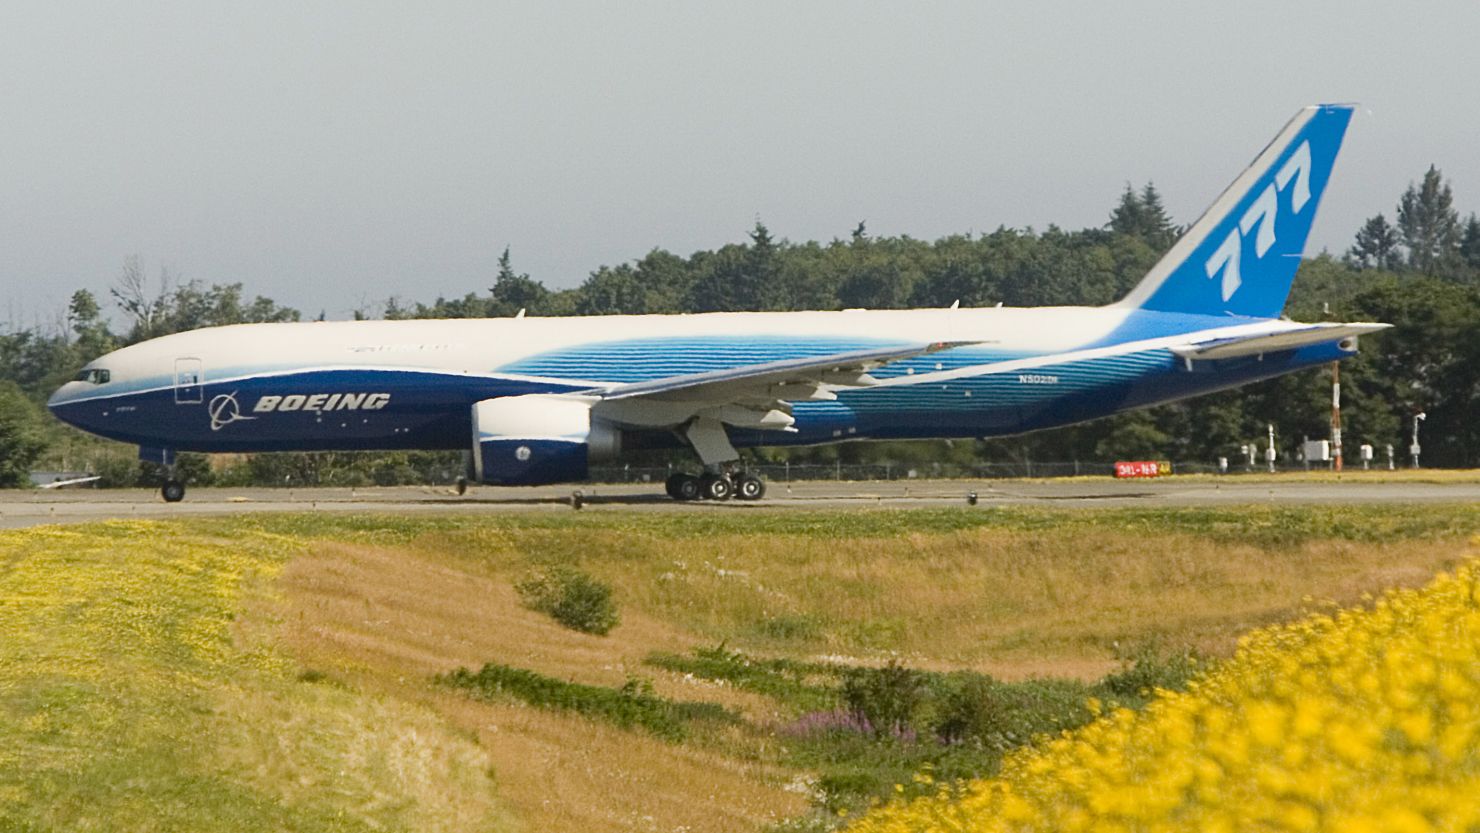 Boeing discovered in 2008 that it had been using fasteners on the 777 that did not meet FAA standards.